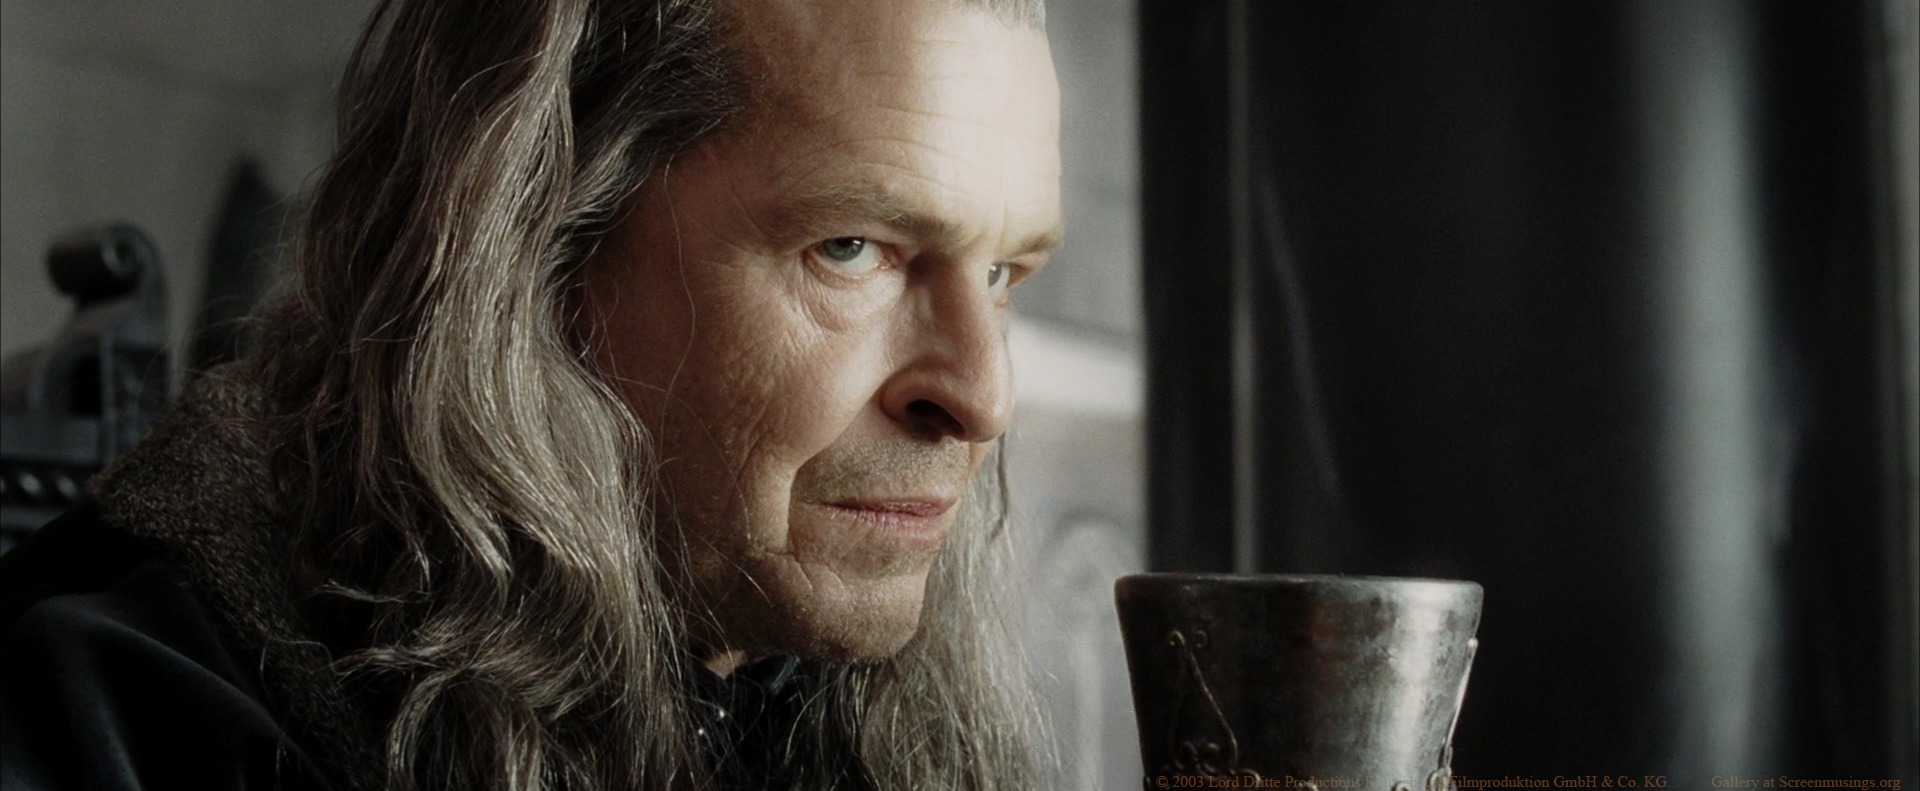 John Noble in The Lord of the Rings: The Return of the King